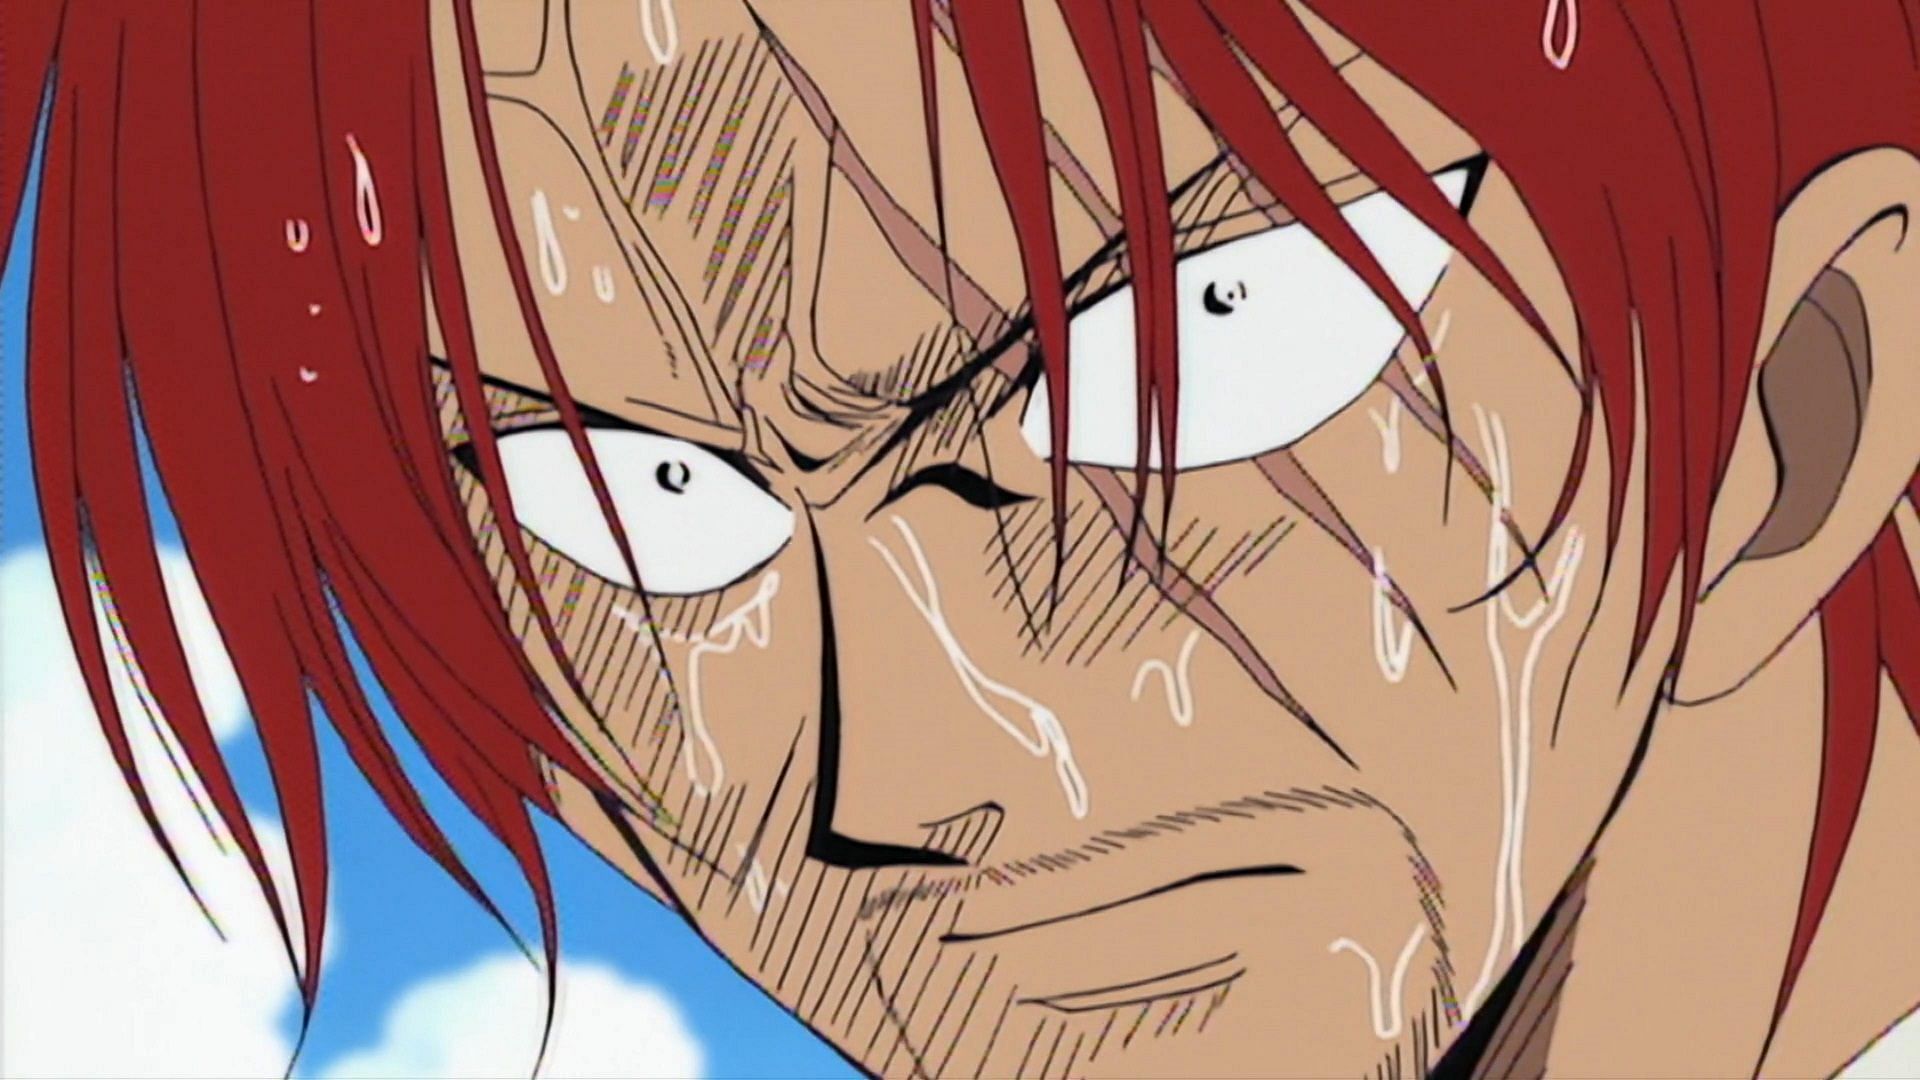 Shanks as seen in One Piece (Image via Toei Animation, One Piece)